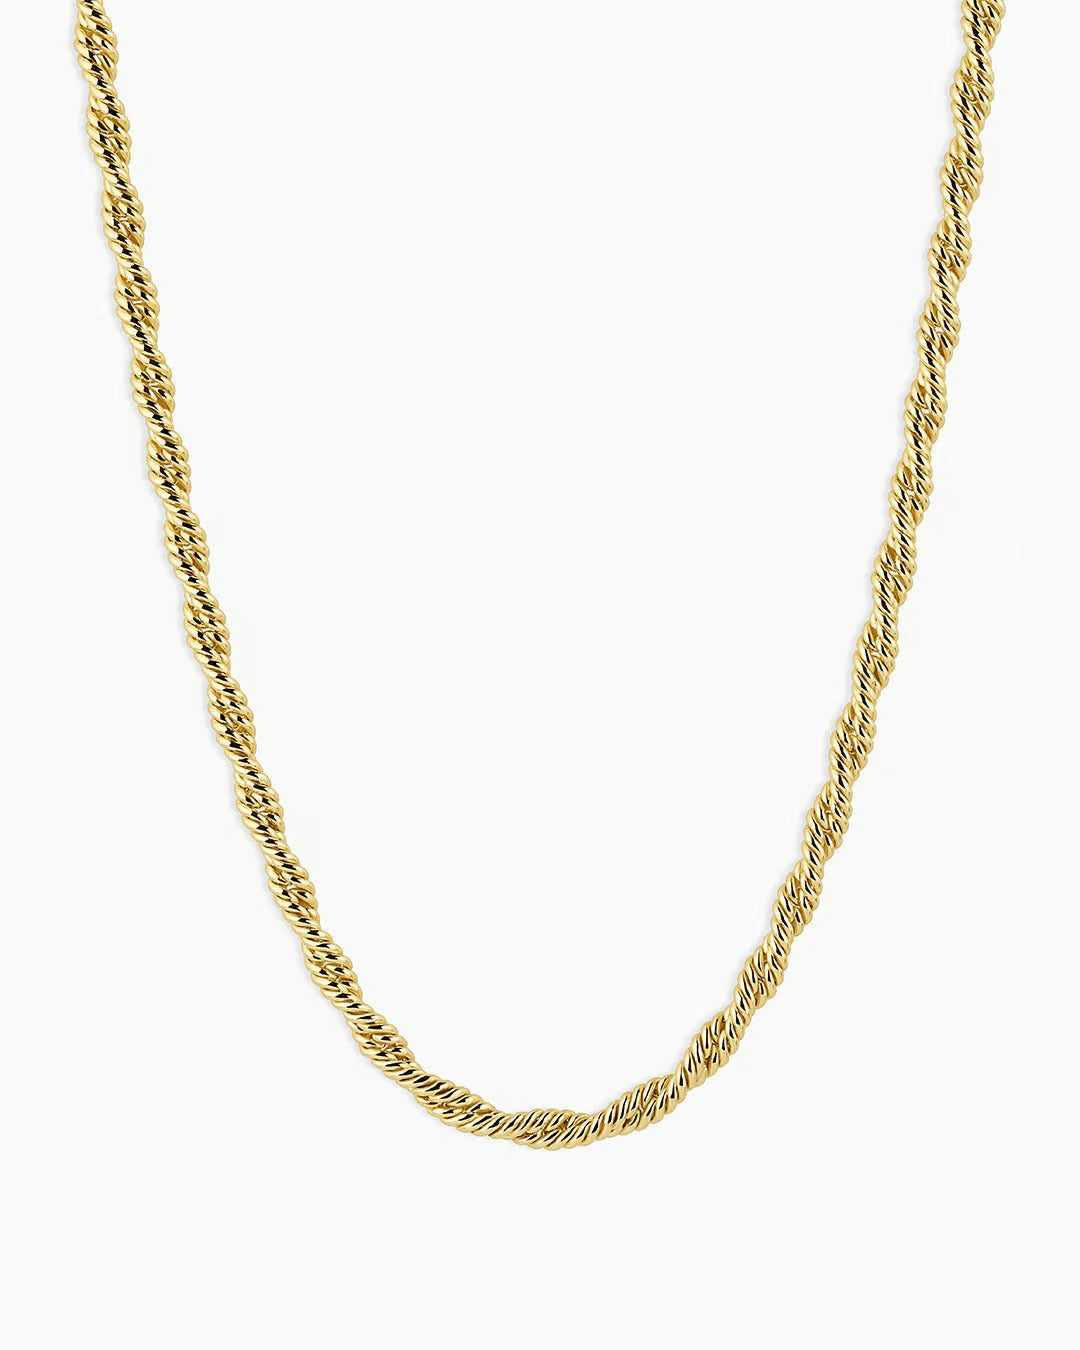 Gold Catalina Necklace